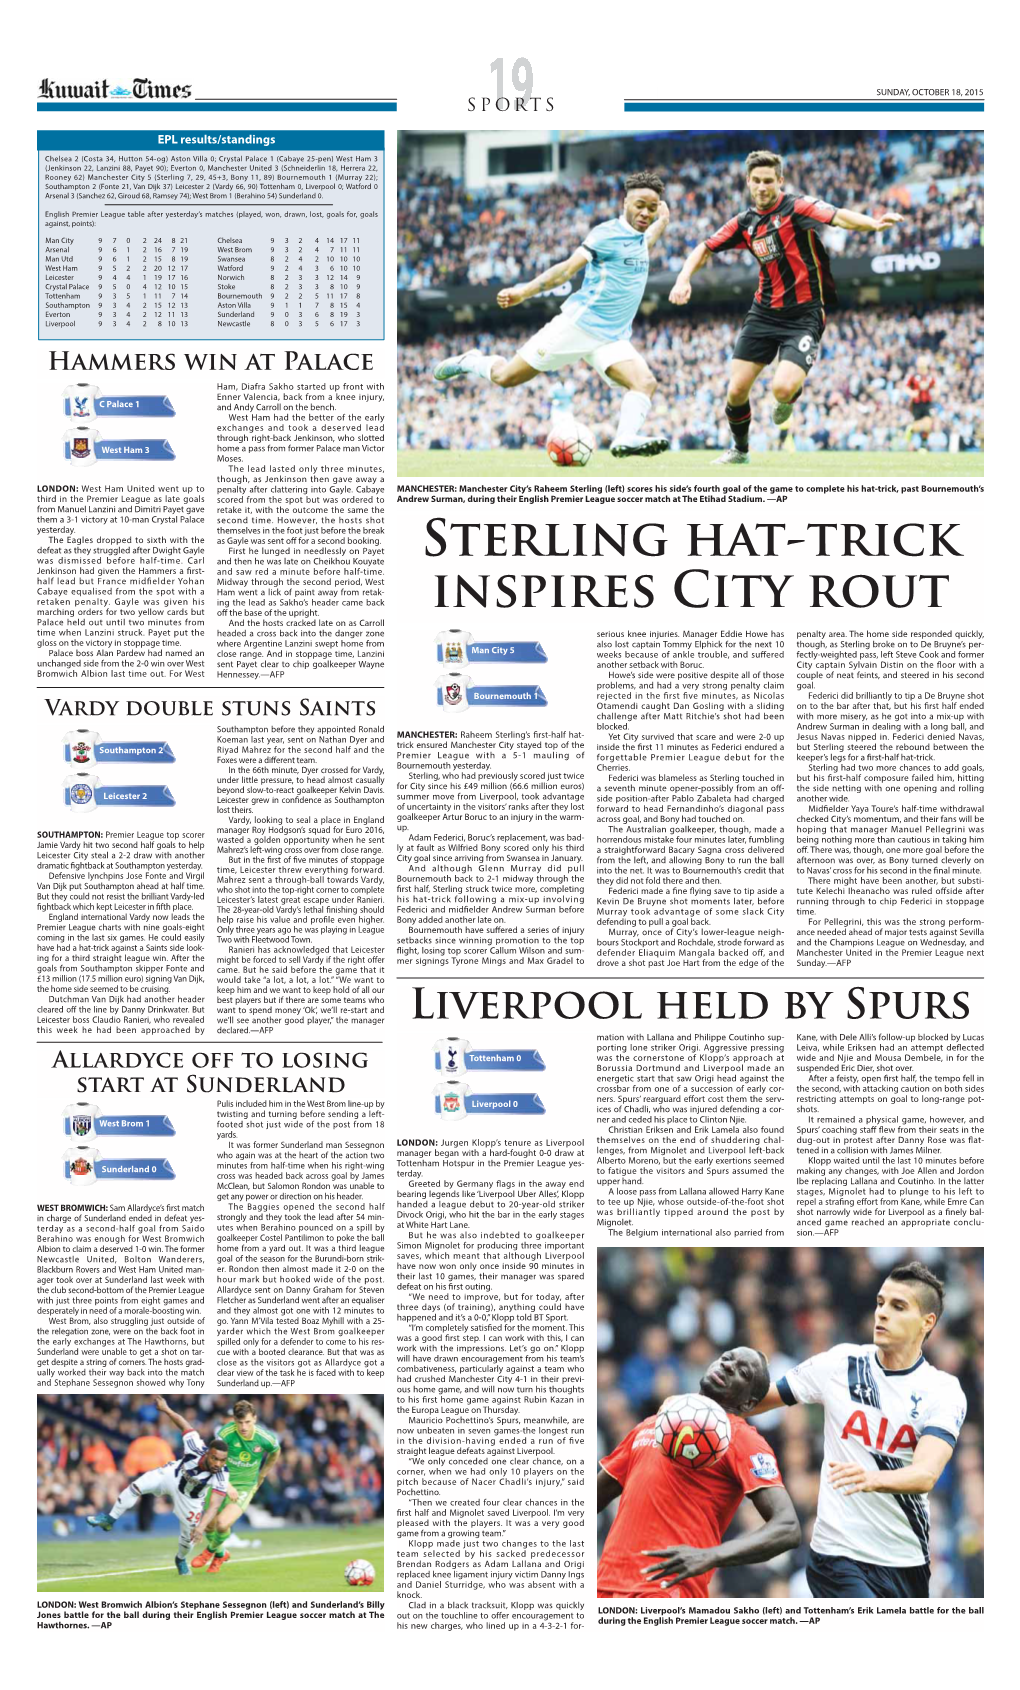 Sterling Hat-Trick Inspires City Rout